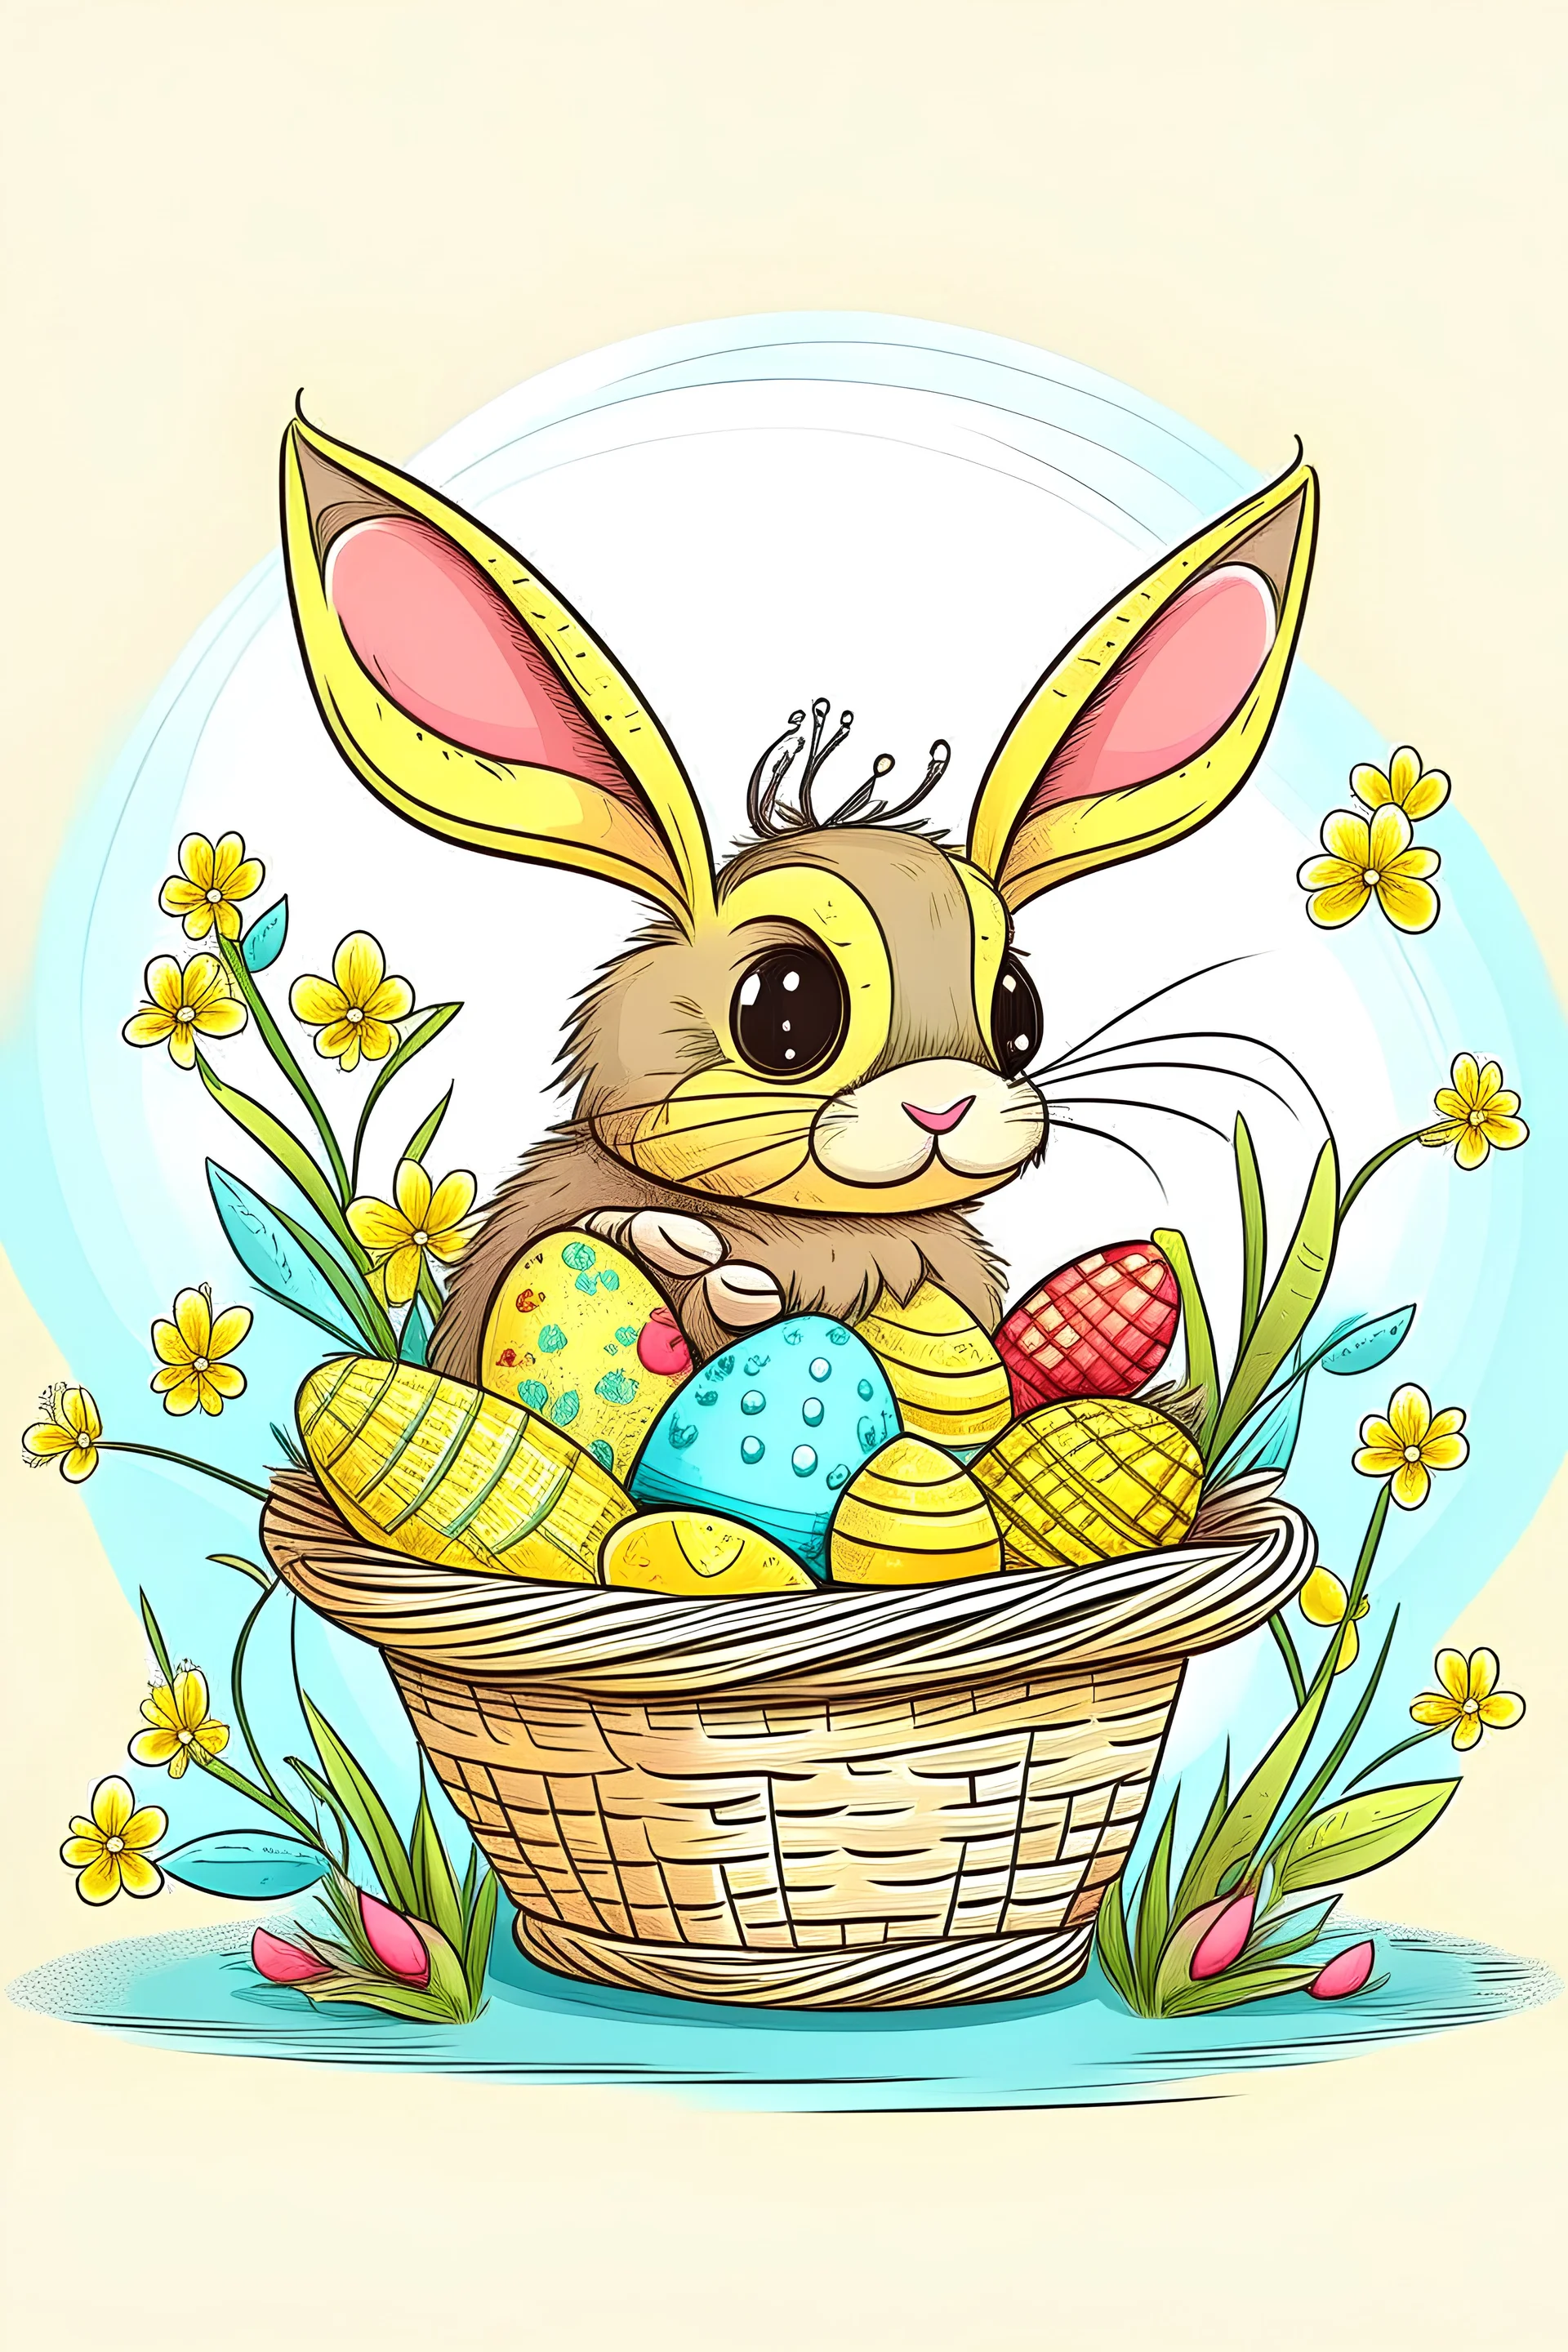 Bee with a basket full of Easter eggs